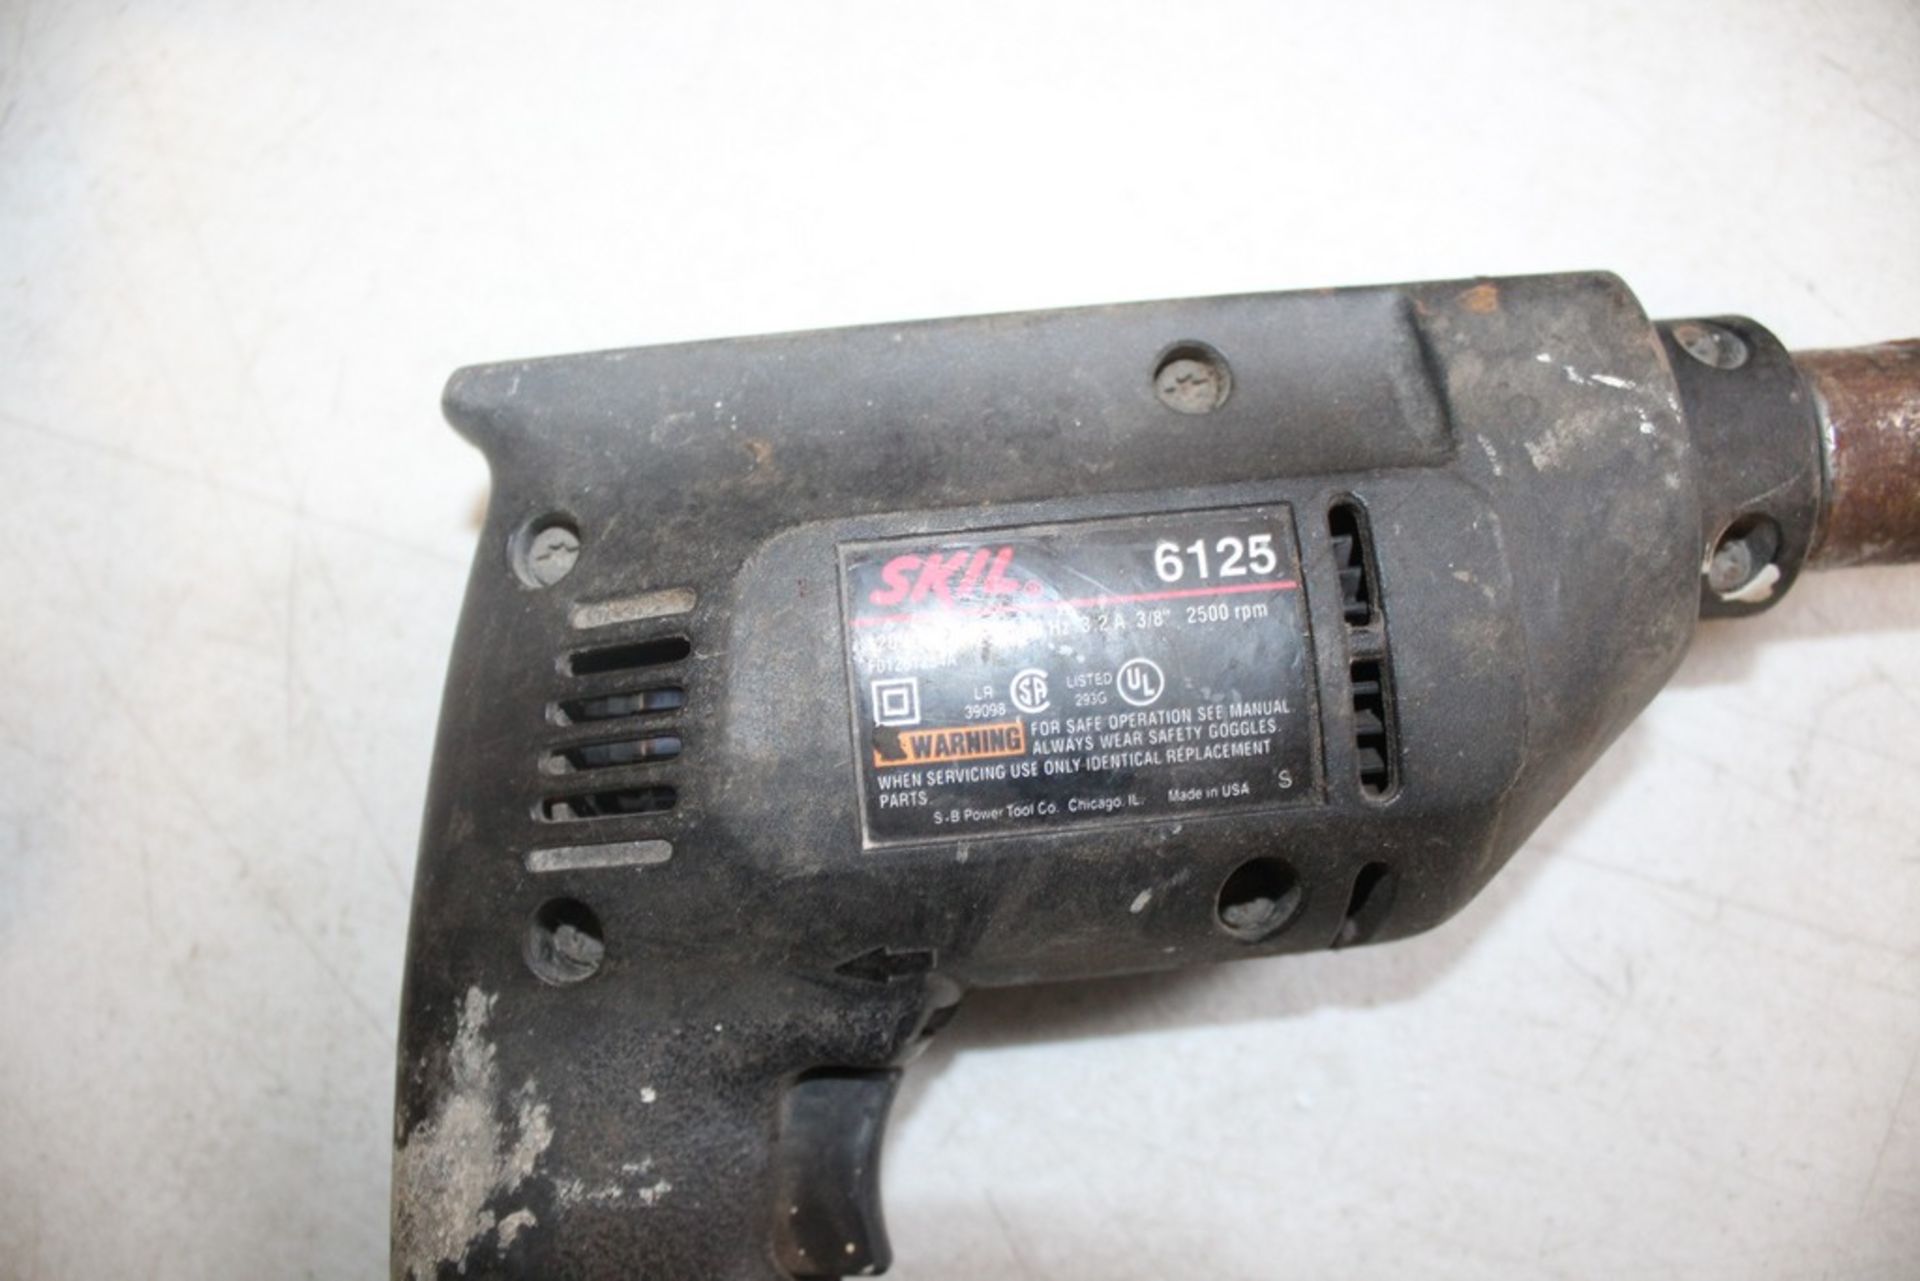 SKIL MODEL 6125 3/8" ELECTRIC DRILL - Image 2 of 2